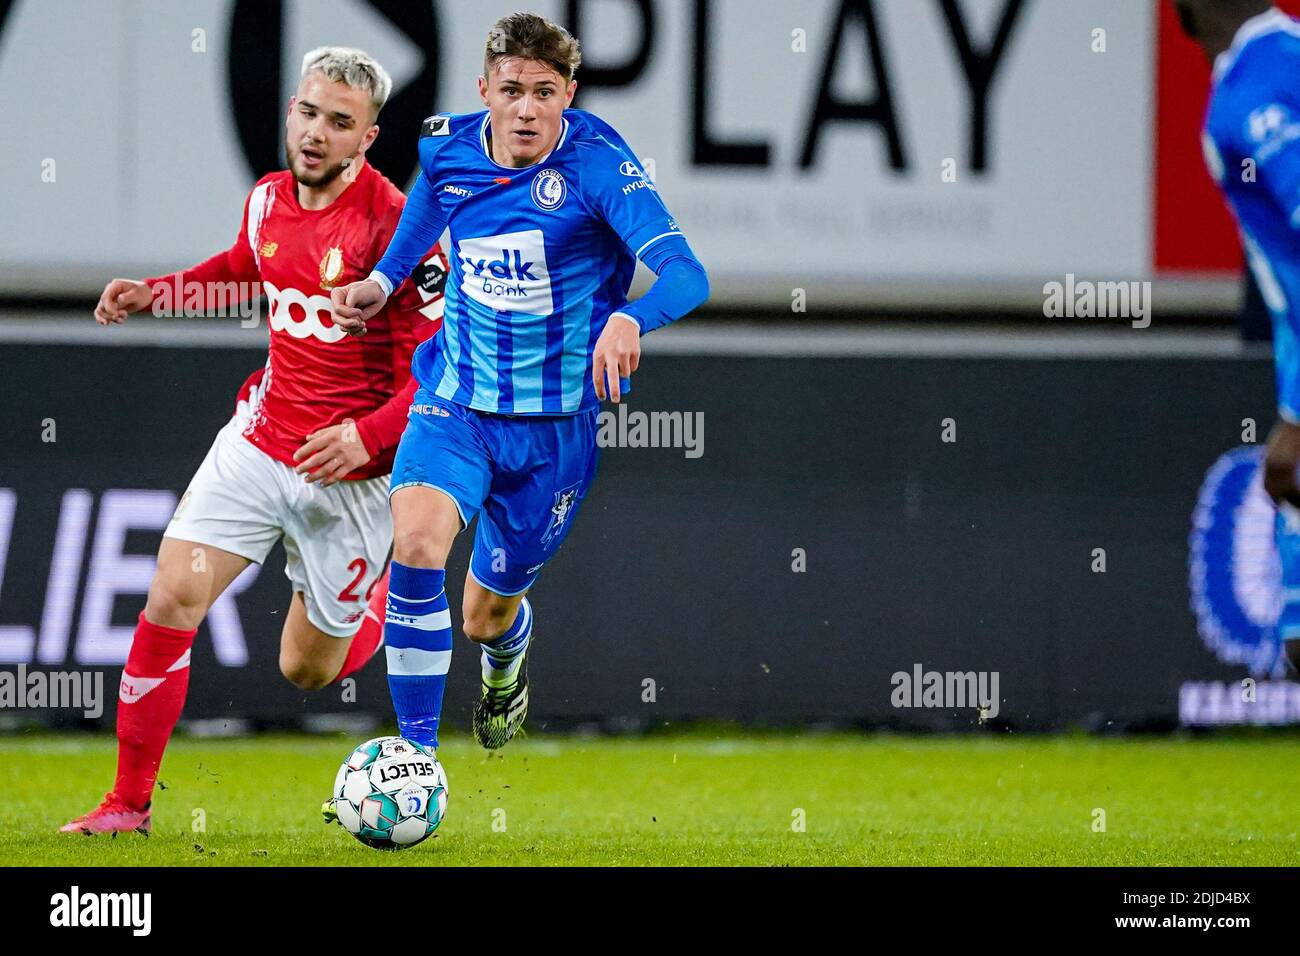 Gent Belgium December 13 Nicolas Raskin Of Standard Liege Alessio Castro Montes Of Kaa Gent During The Pro League Match Between Kaa Gent And Stan Stock Photo Alamy